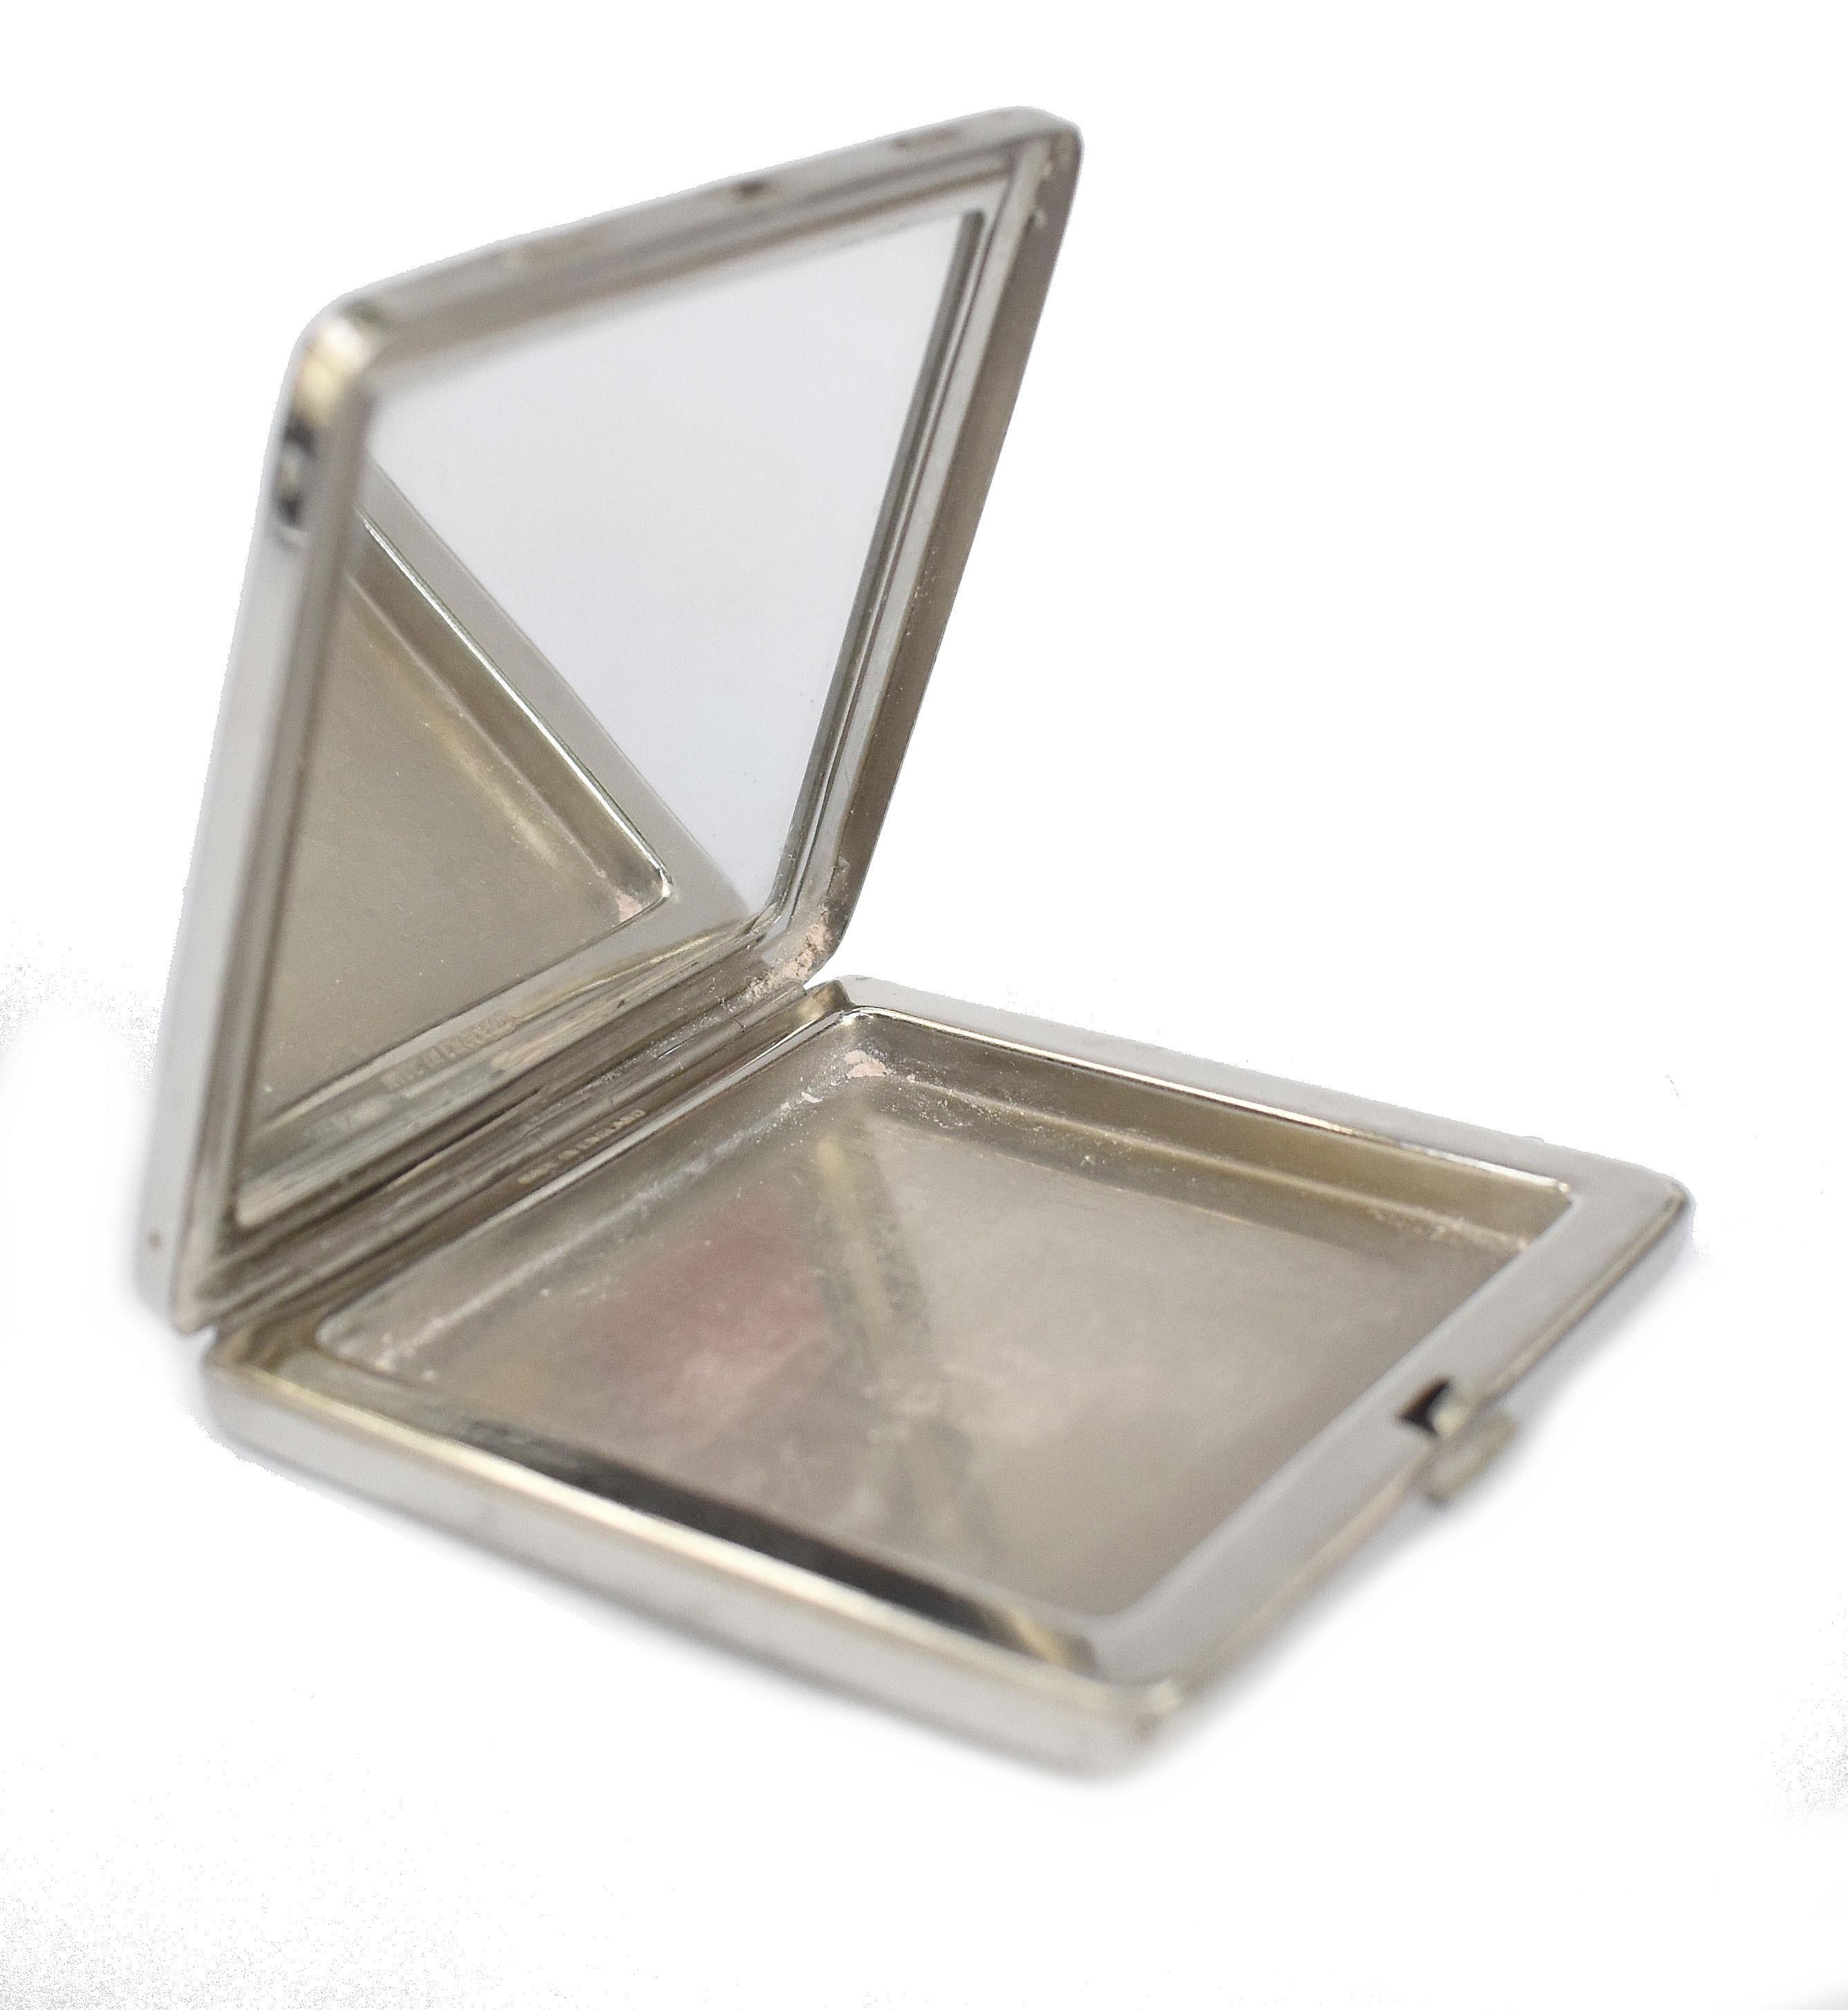 Offered for your consideration is this beautifully stylish Art Deco ladies powder compact by Dubarry . The case is made of chromium metal with machine turned pattern on the reverse with Dubarry name on the base. The lid is jet black enamel with